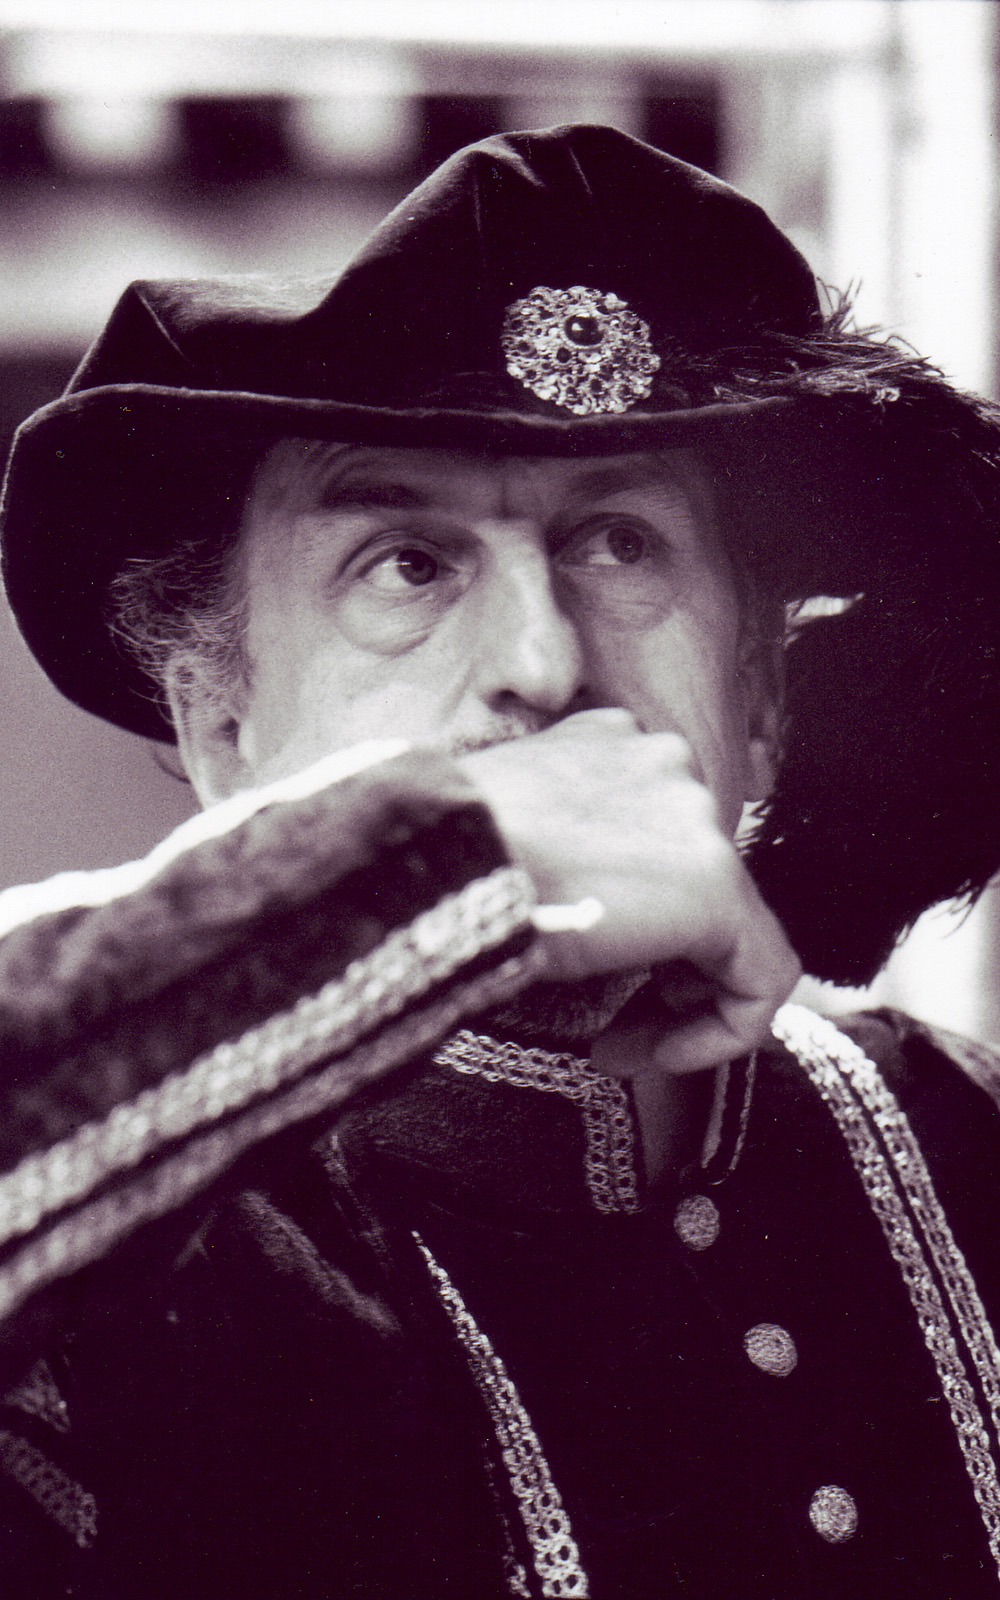 A man wearing a large hat leans his hand to his mouth.